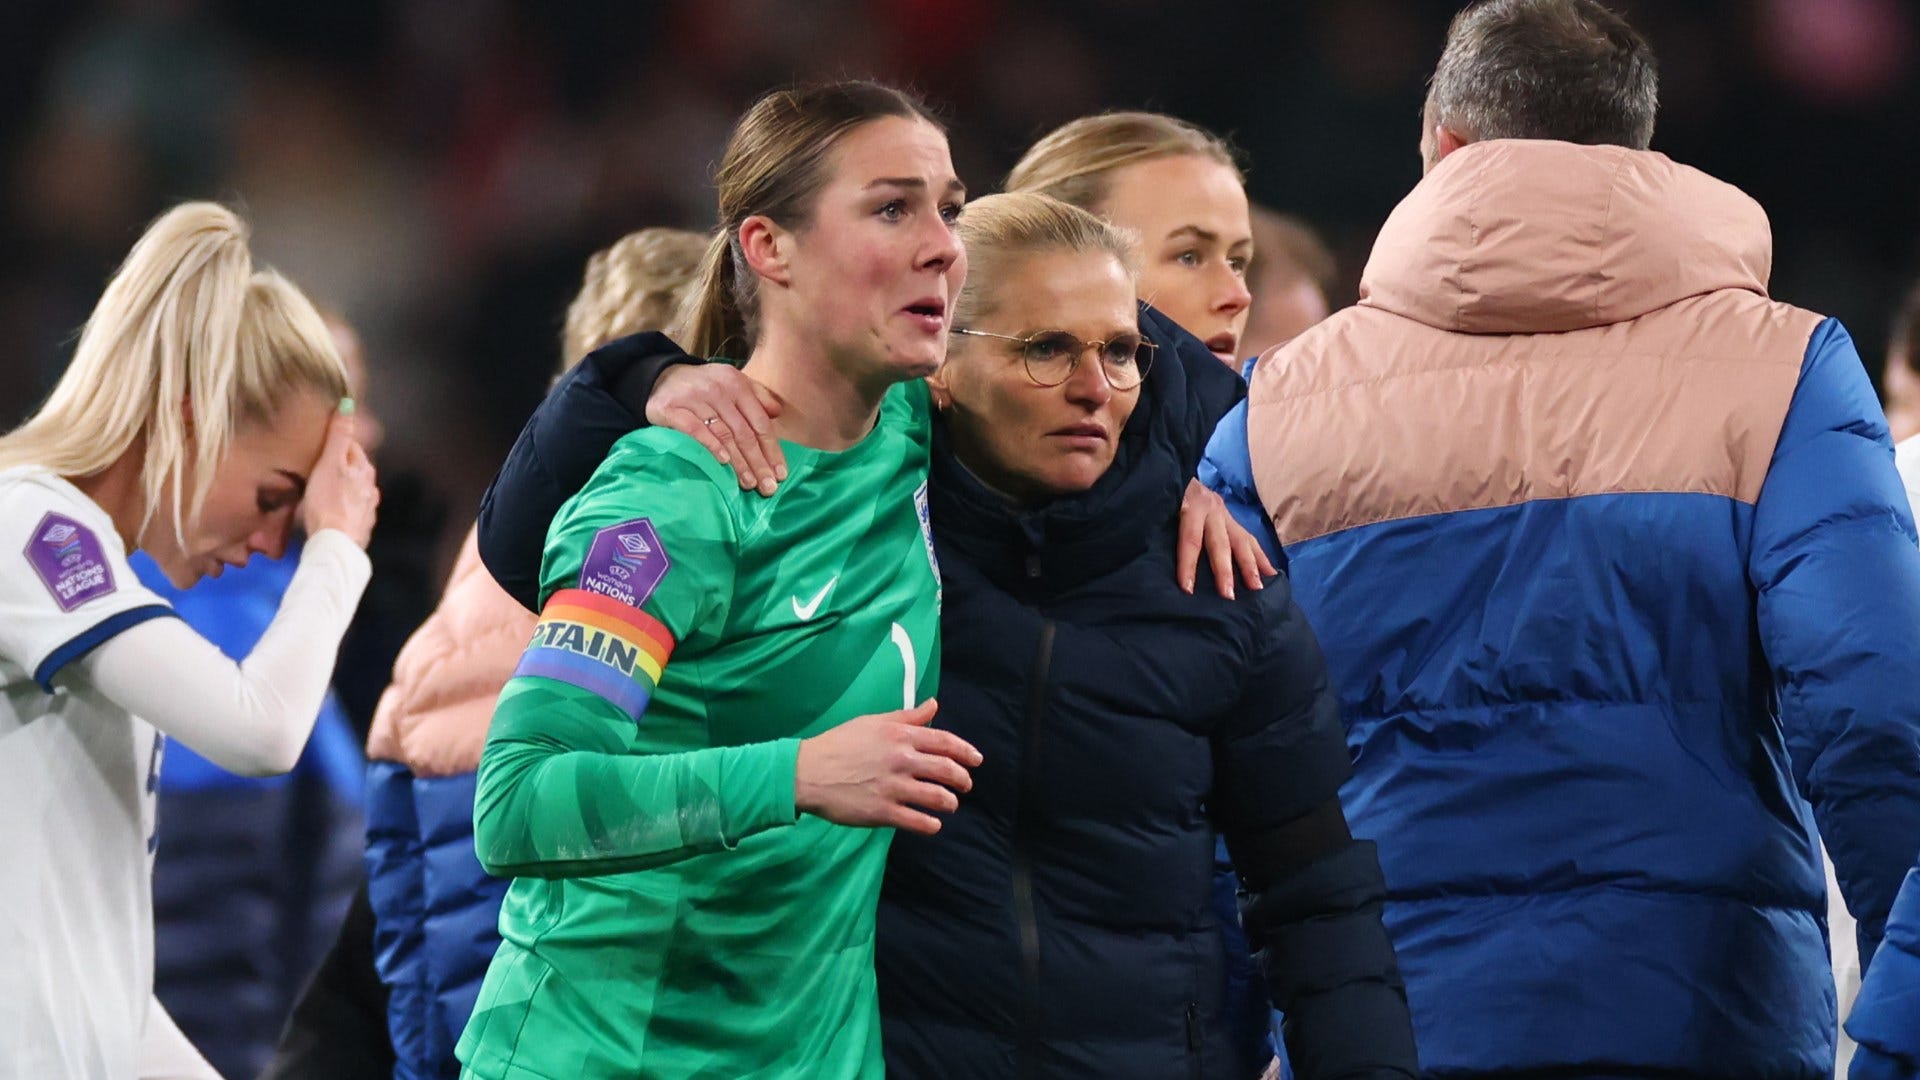 'I don't want her to talk like that' - England boss Sarina Wiegman responds to Mary Earps' comments that she let the Lionesses 'down' in Netherlands win